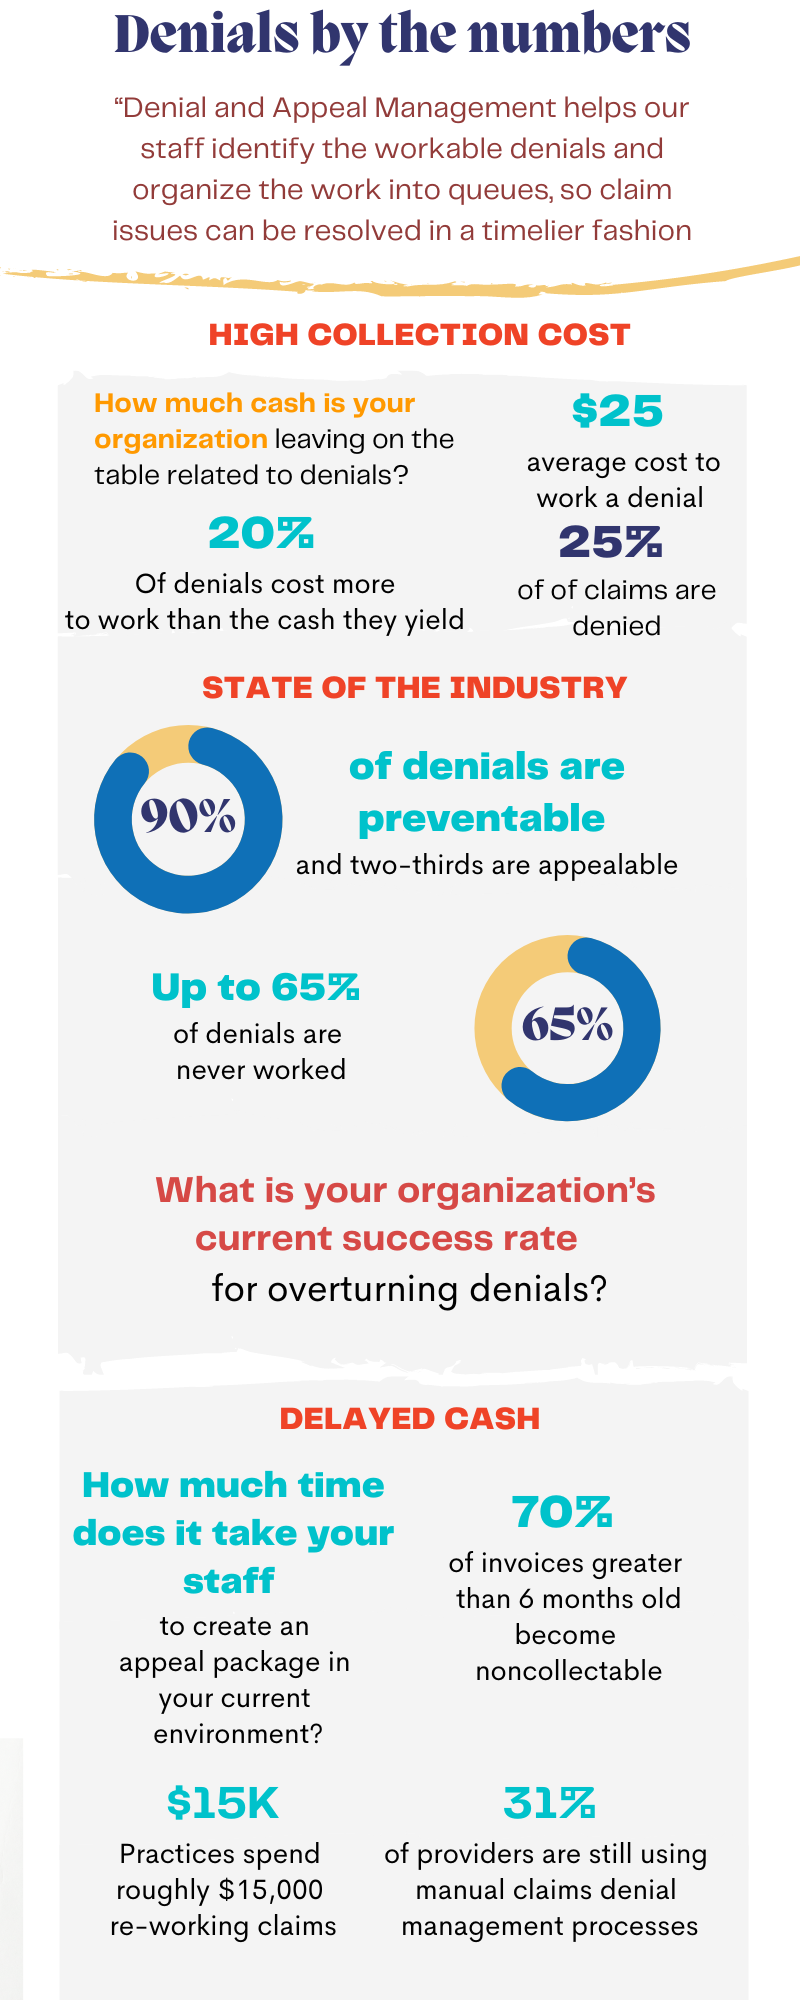 Denials by the numbers

“Denial and Appeal Management helps our
staff identify the workable denials and
organize the work into queues, so claim

issues can be resolved in a timelier fashion

HIGH COLLECTION COST

How much cash is your $25
organization leaving on the

table related to denials? avelagelcosito

work a denial

20% 25%
Of denials cost more of of claims are
to work than the cash they yield denied

STATE OF THE INDUSTRY

of denials are

90% preventable
and two-thirds are appealable

Up to 65% B
’
of denials are 65%
never worked

What is your organization’s
current success rate
for overturning denials?

DELAYED CASH

How much time
does it take your

70%

of invoices greater

staff than 6 months old
to create an become
appeal package in noncollectable

your current
environment?

$15K 317%
Practices spend of providers are still using
roughly $15,000 manual claims denial

re-working claims management processes